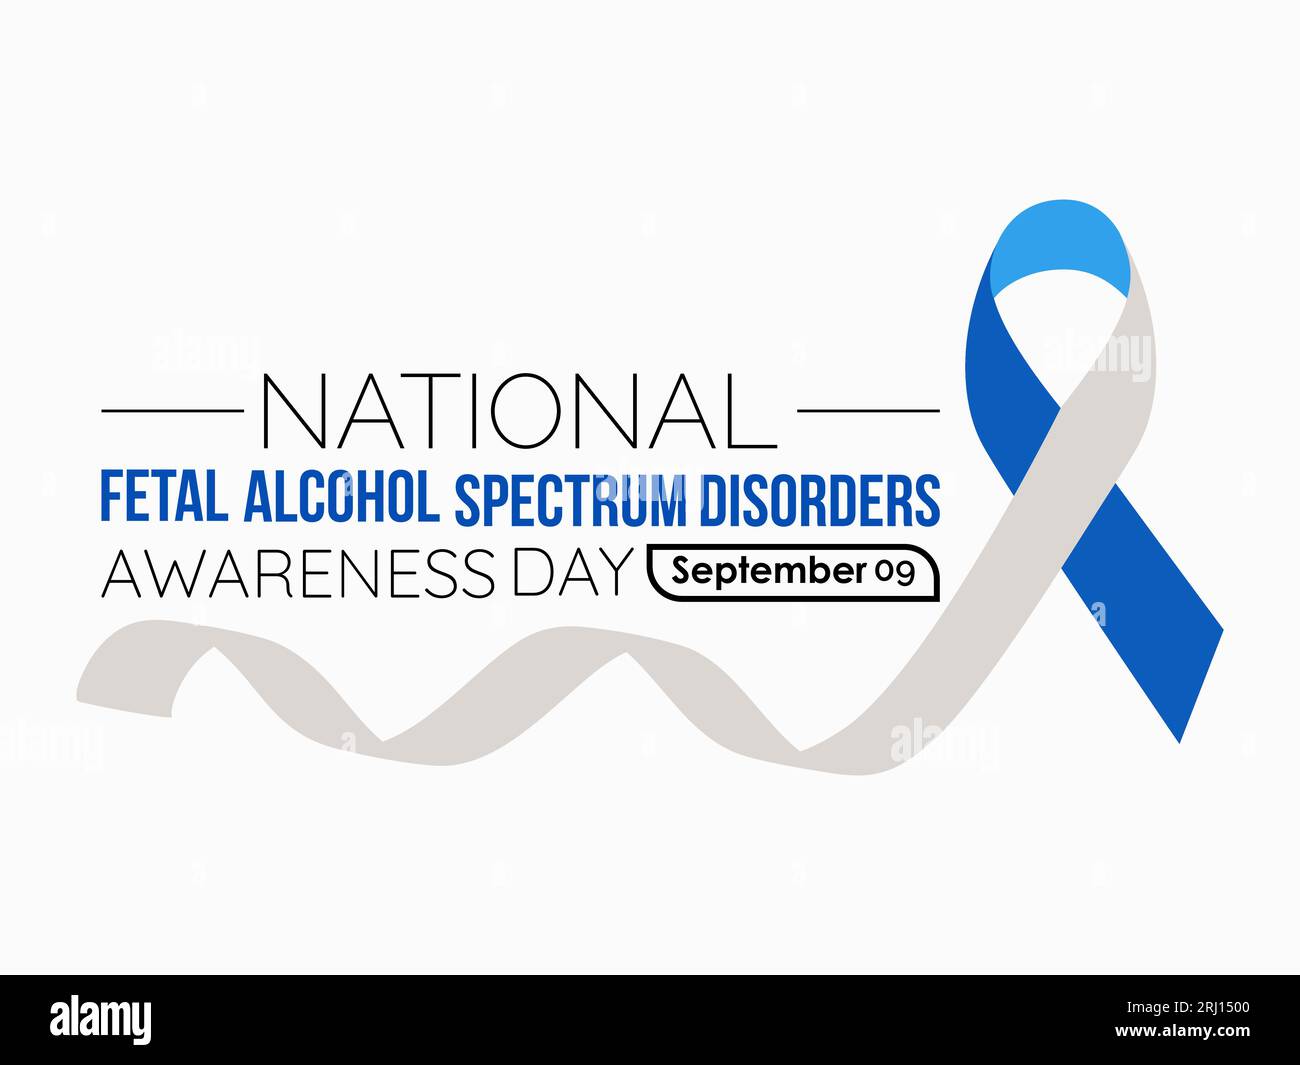 National Fetal Alcohol Spectrum Disorders (FASD) Awareness Day Raises Compassion, Education, and Hope. Shining Light on Preventable Harm vector illust Stock Vector